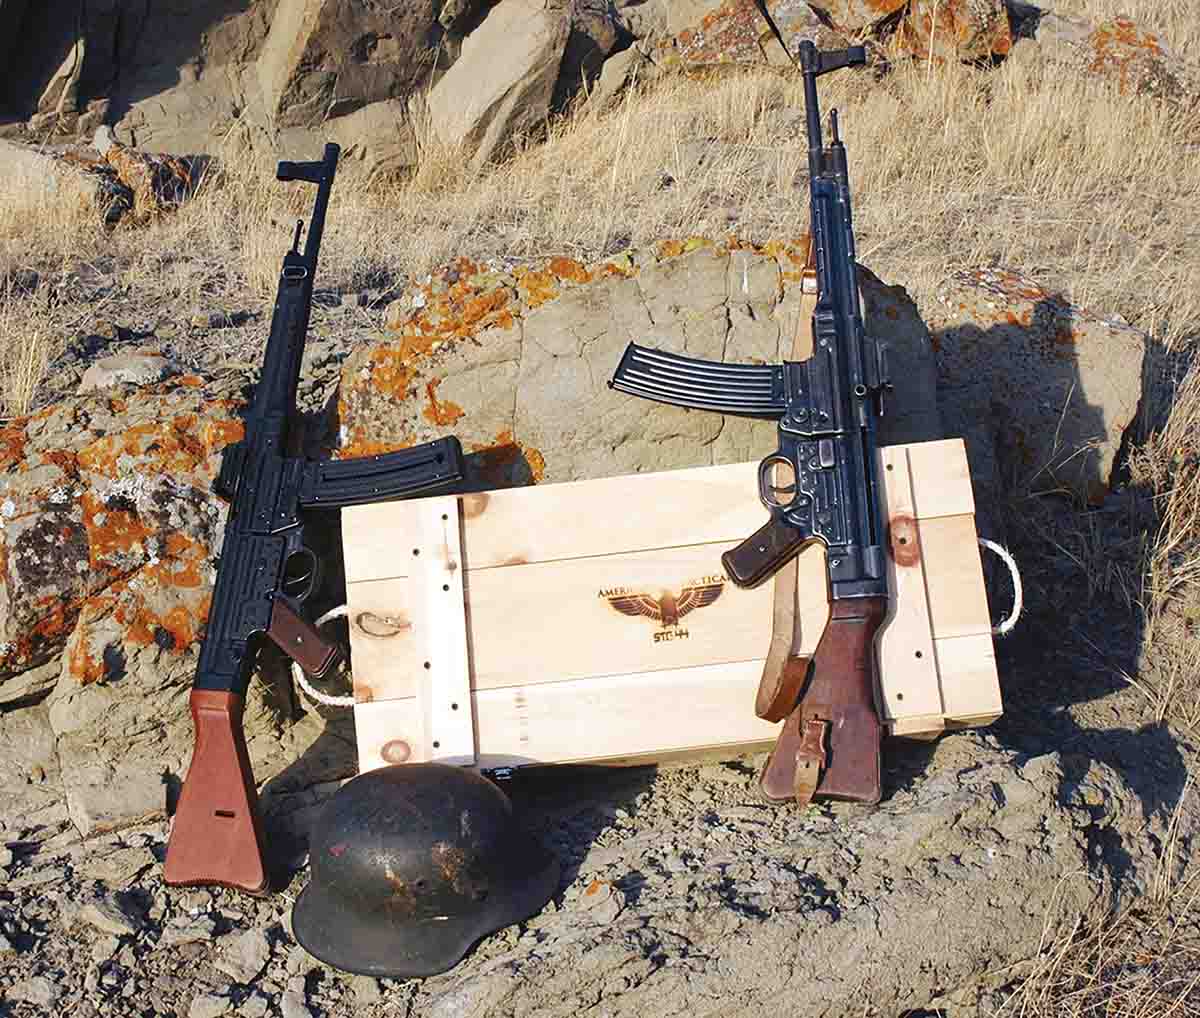 The German company GMG produces a .22 LR version of the Sturmgewehr. It is shown at left along with Mike’s original MP44.